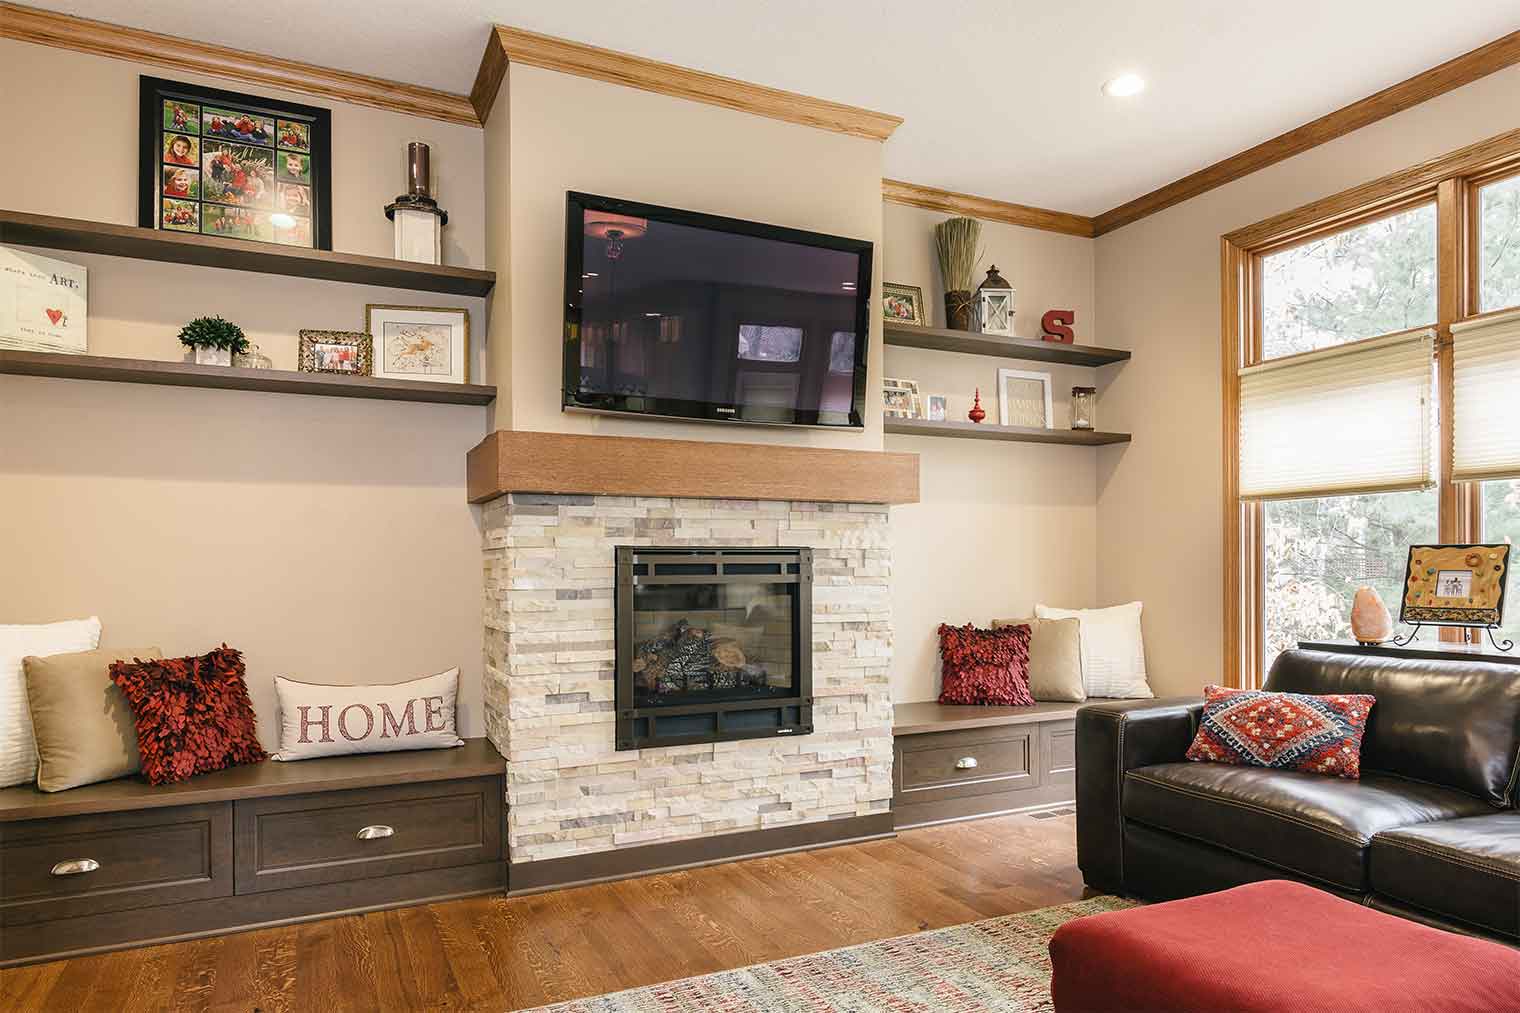 Family room remodel off of large kitchen remodel designed and built by Silent Rivers of Clive, Iowa features stone fireplace, bench seats and wrap around mantel